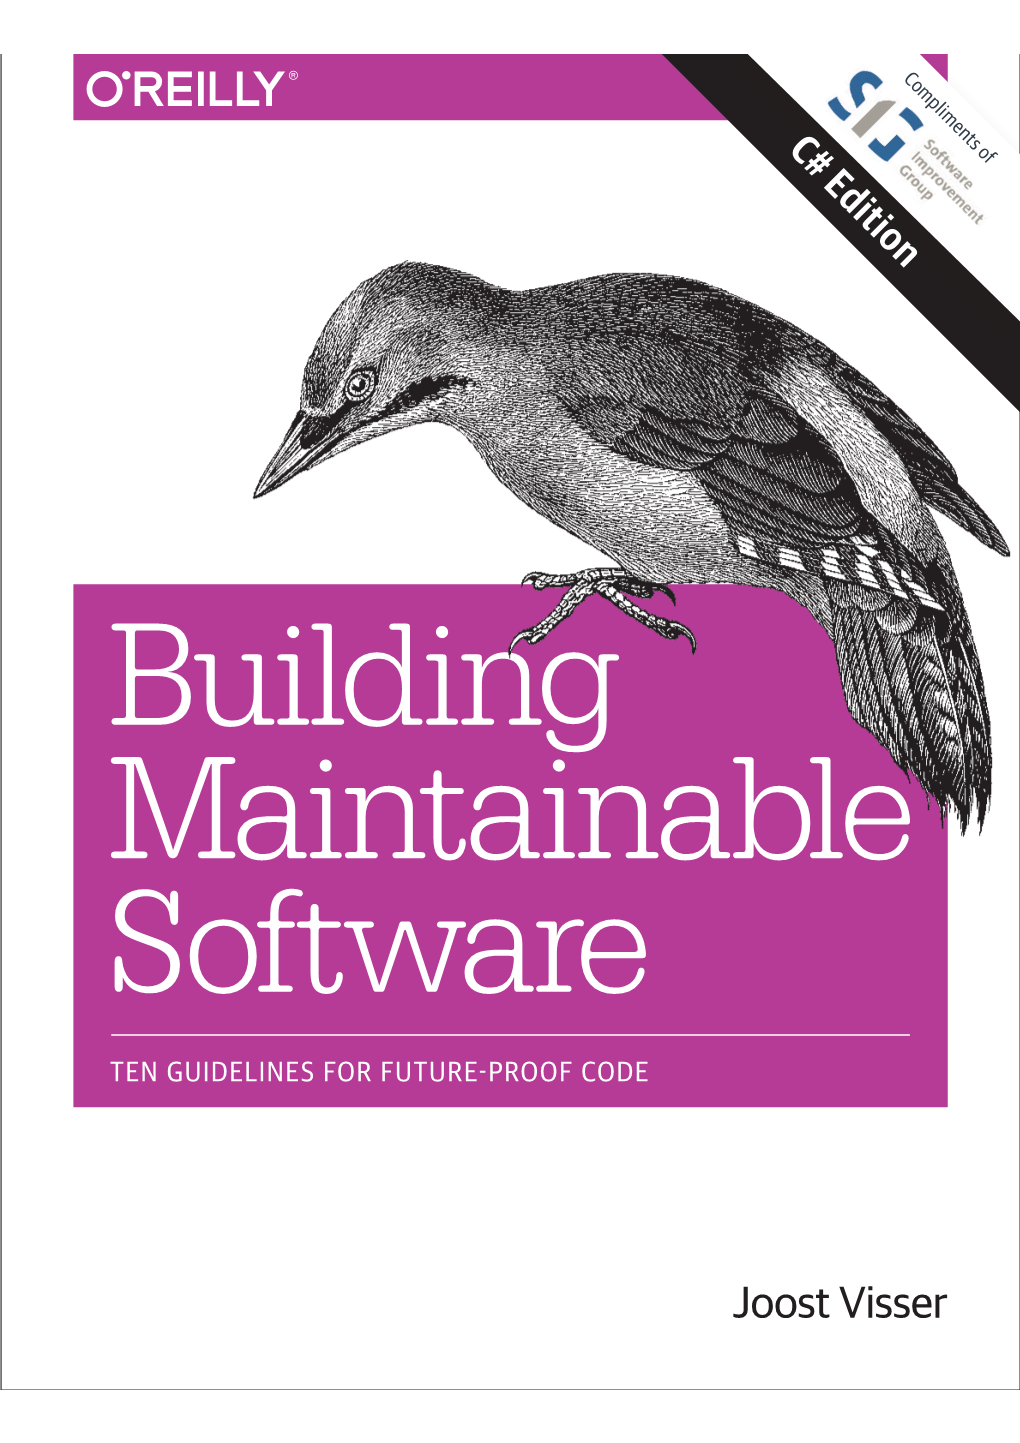 Building Maintainable Software